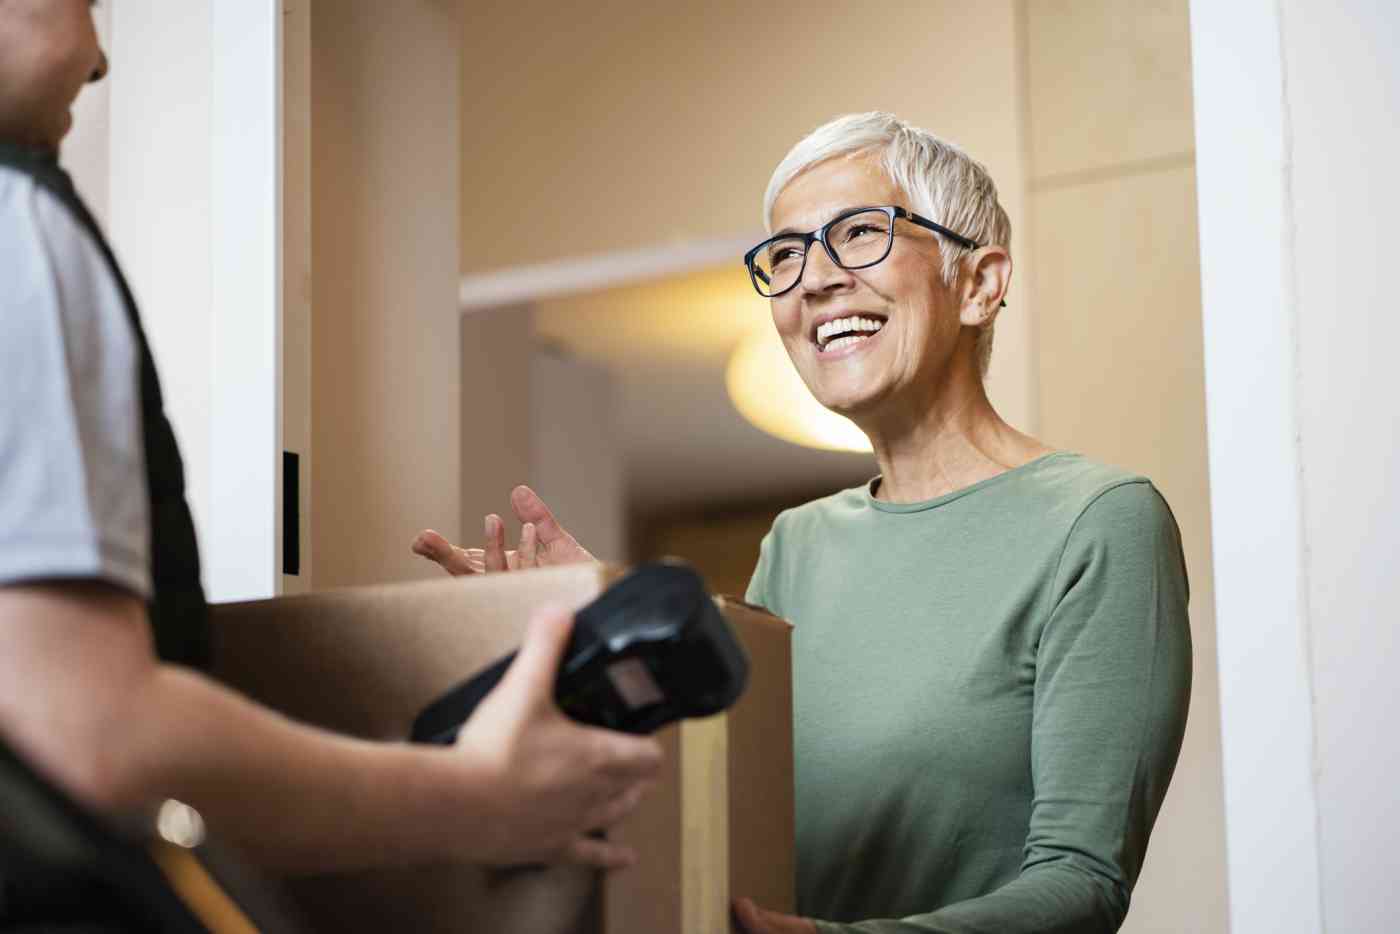 A senior woman accepts a package from a delivery person who is holding a scanning or payment device.